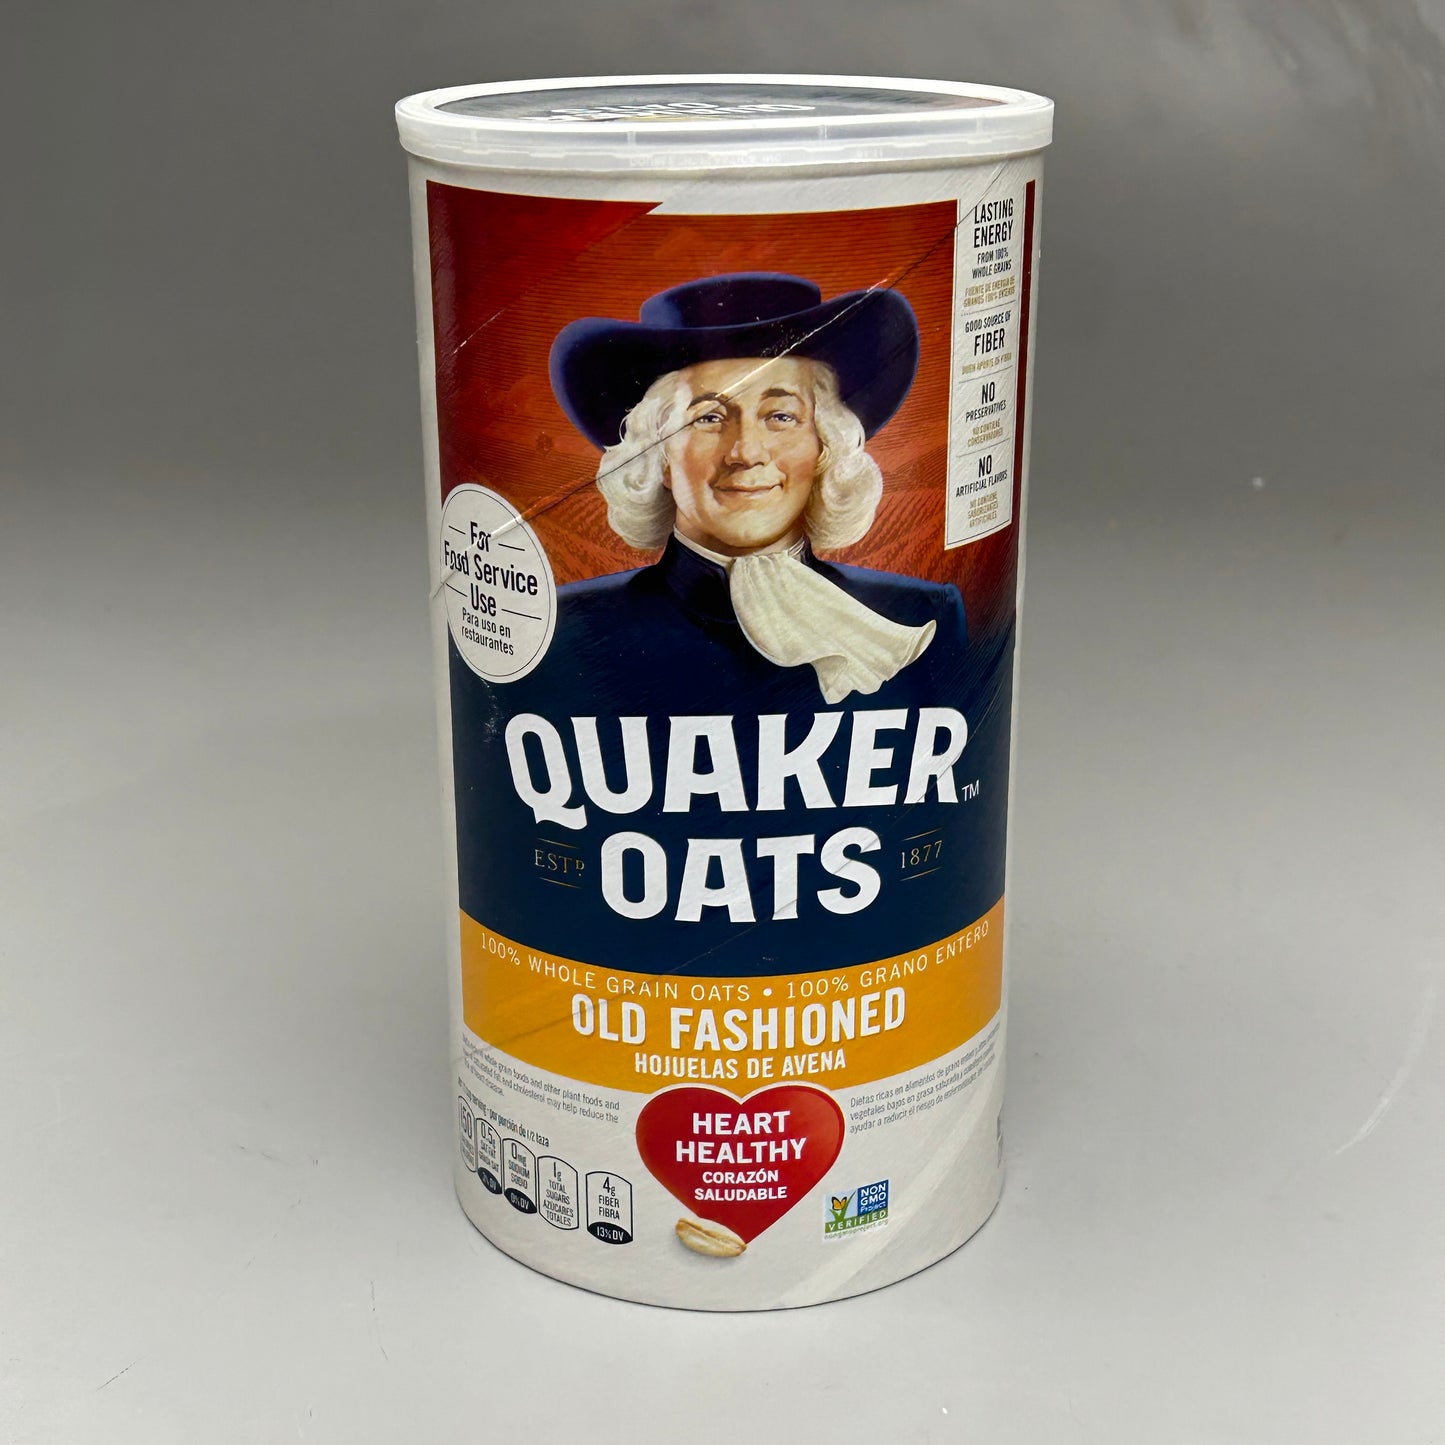 QUAKER OATS 3-PK! Old Fashioned Whole Grain Oats 42 oz Canisters BB 5/24 (New)